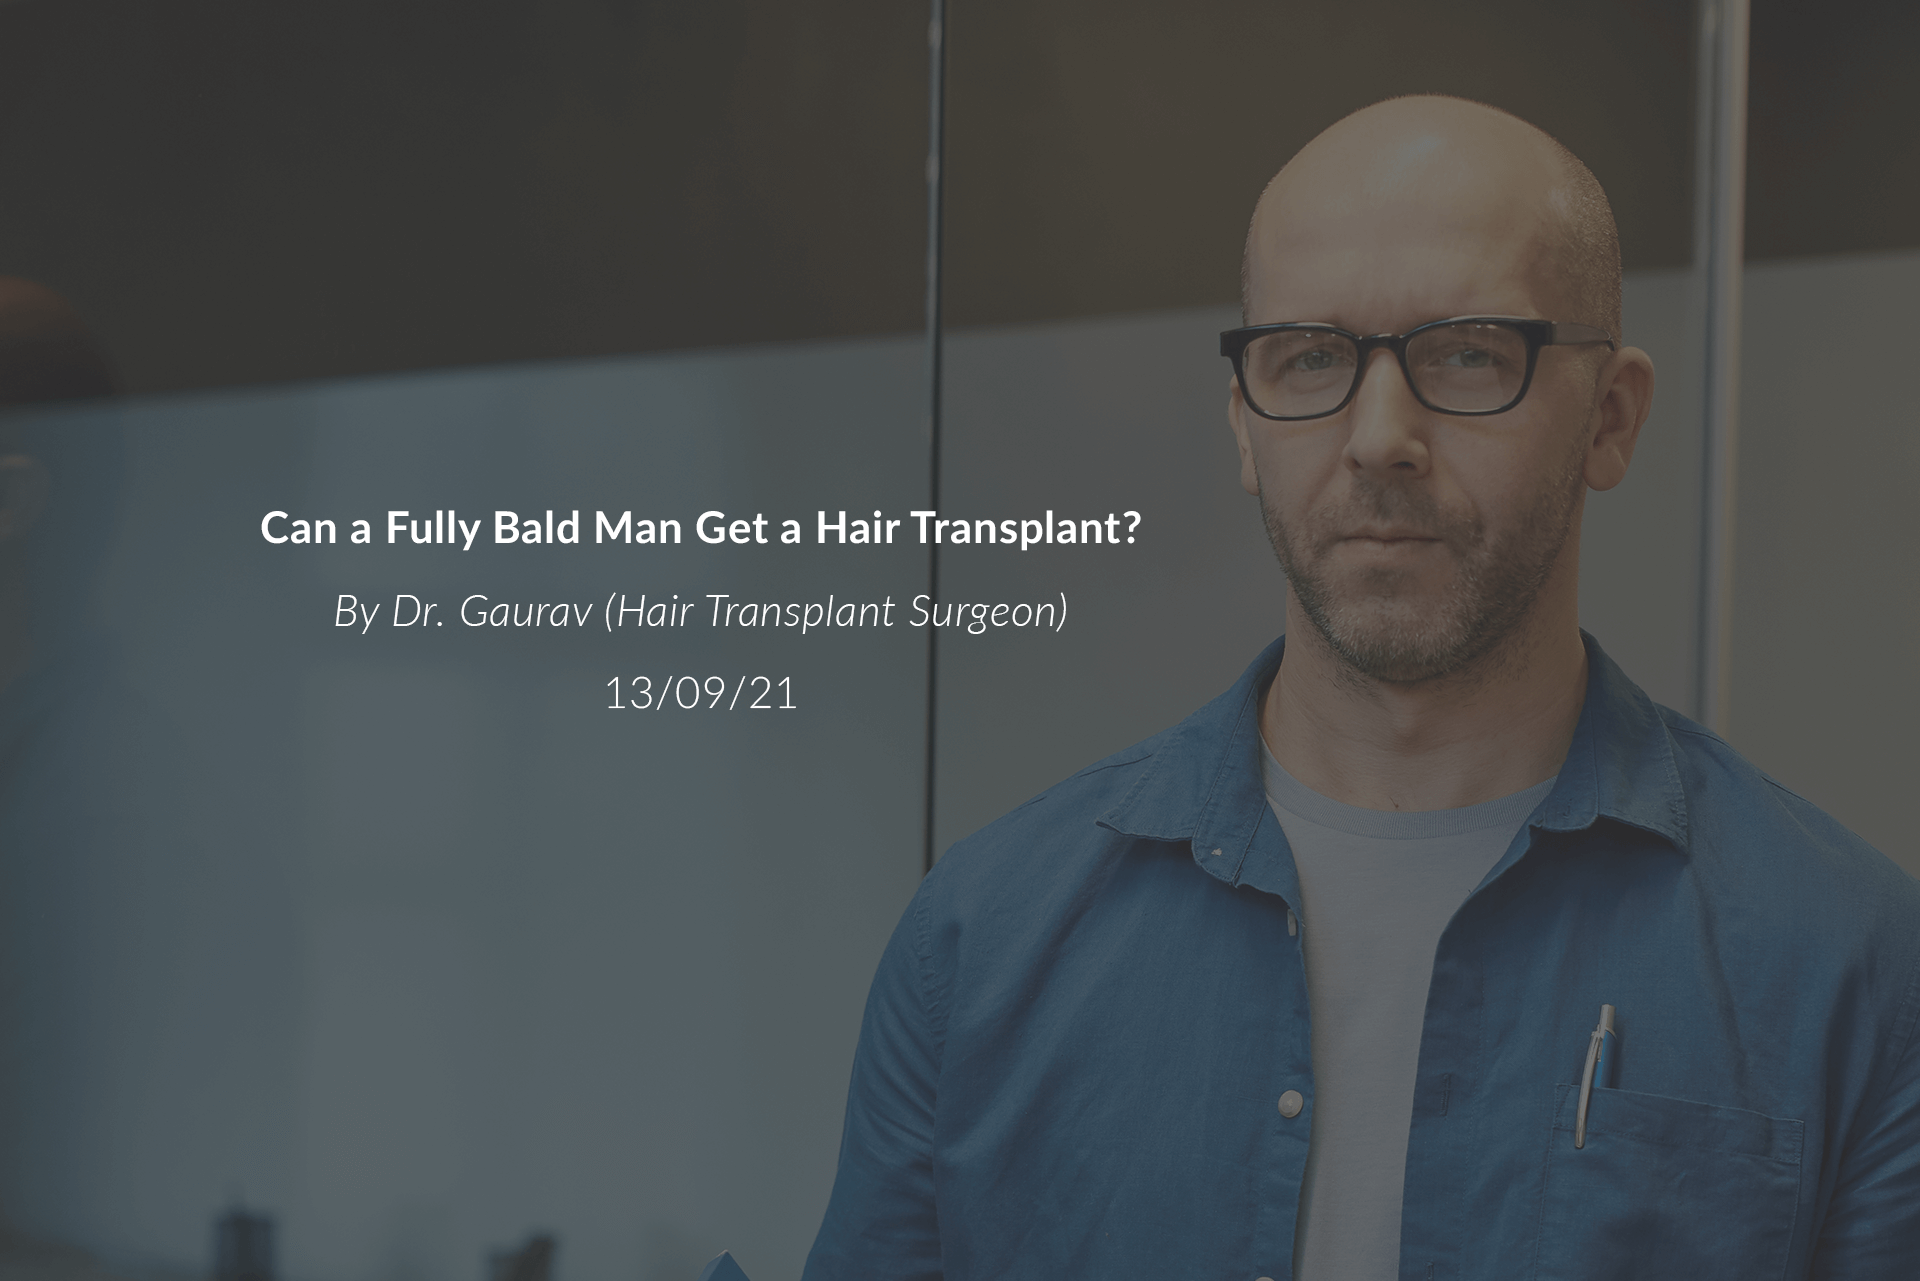 Can a Fully Bald Man Get a Hair Transplant?